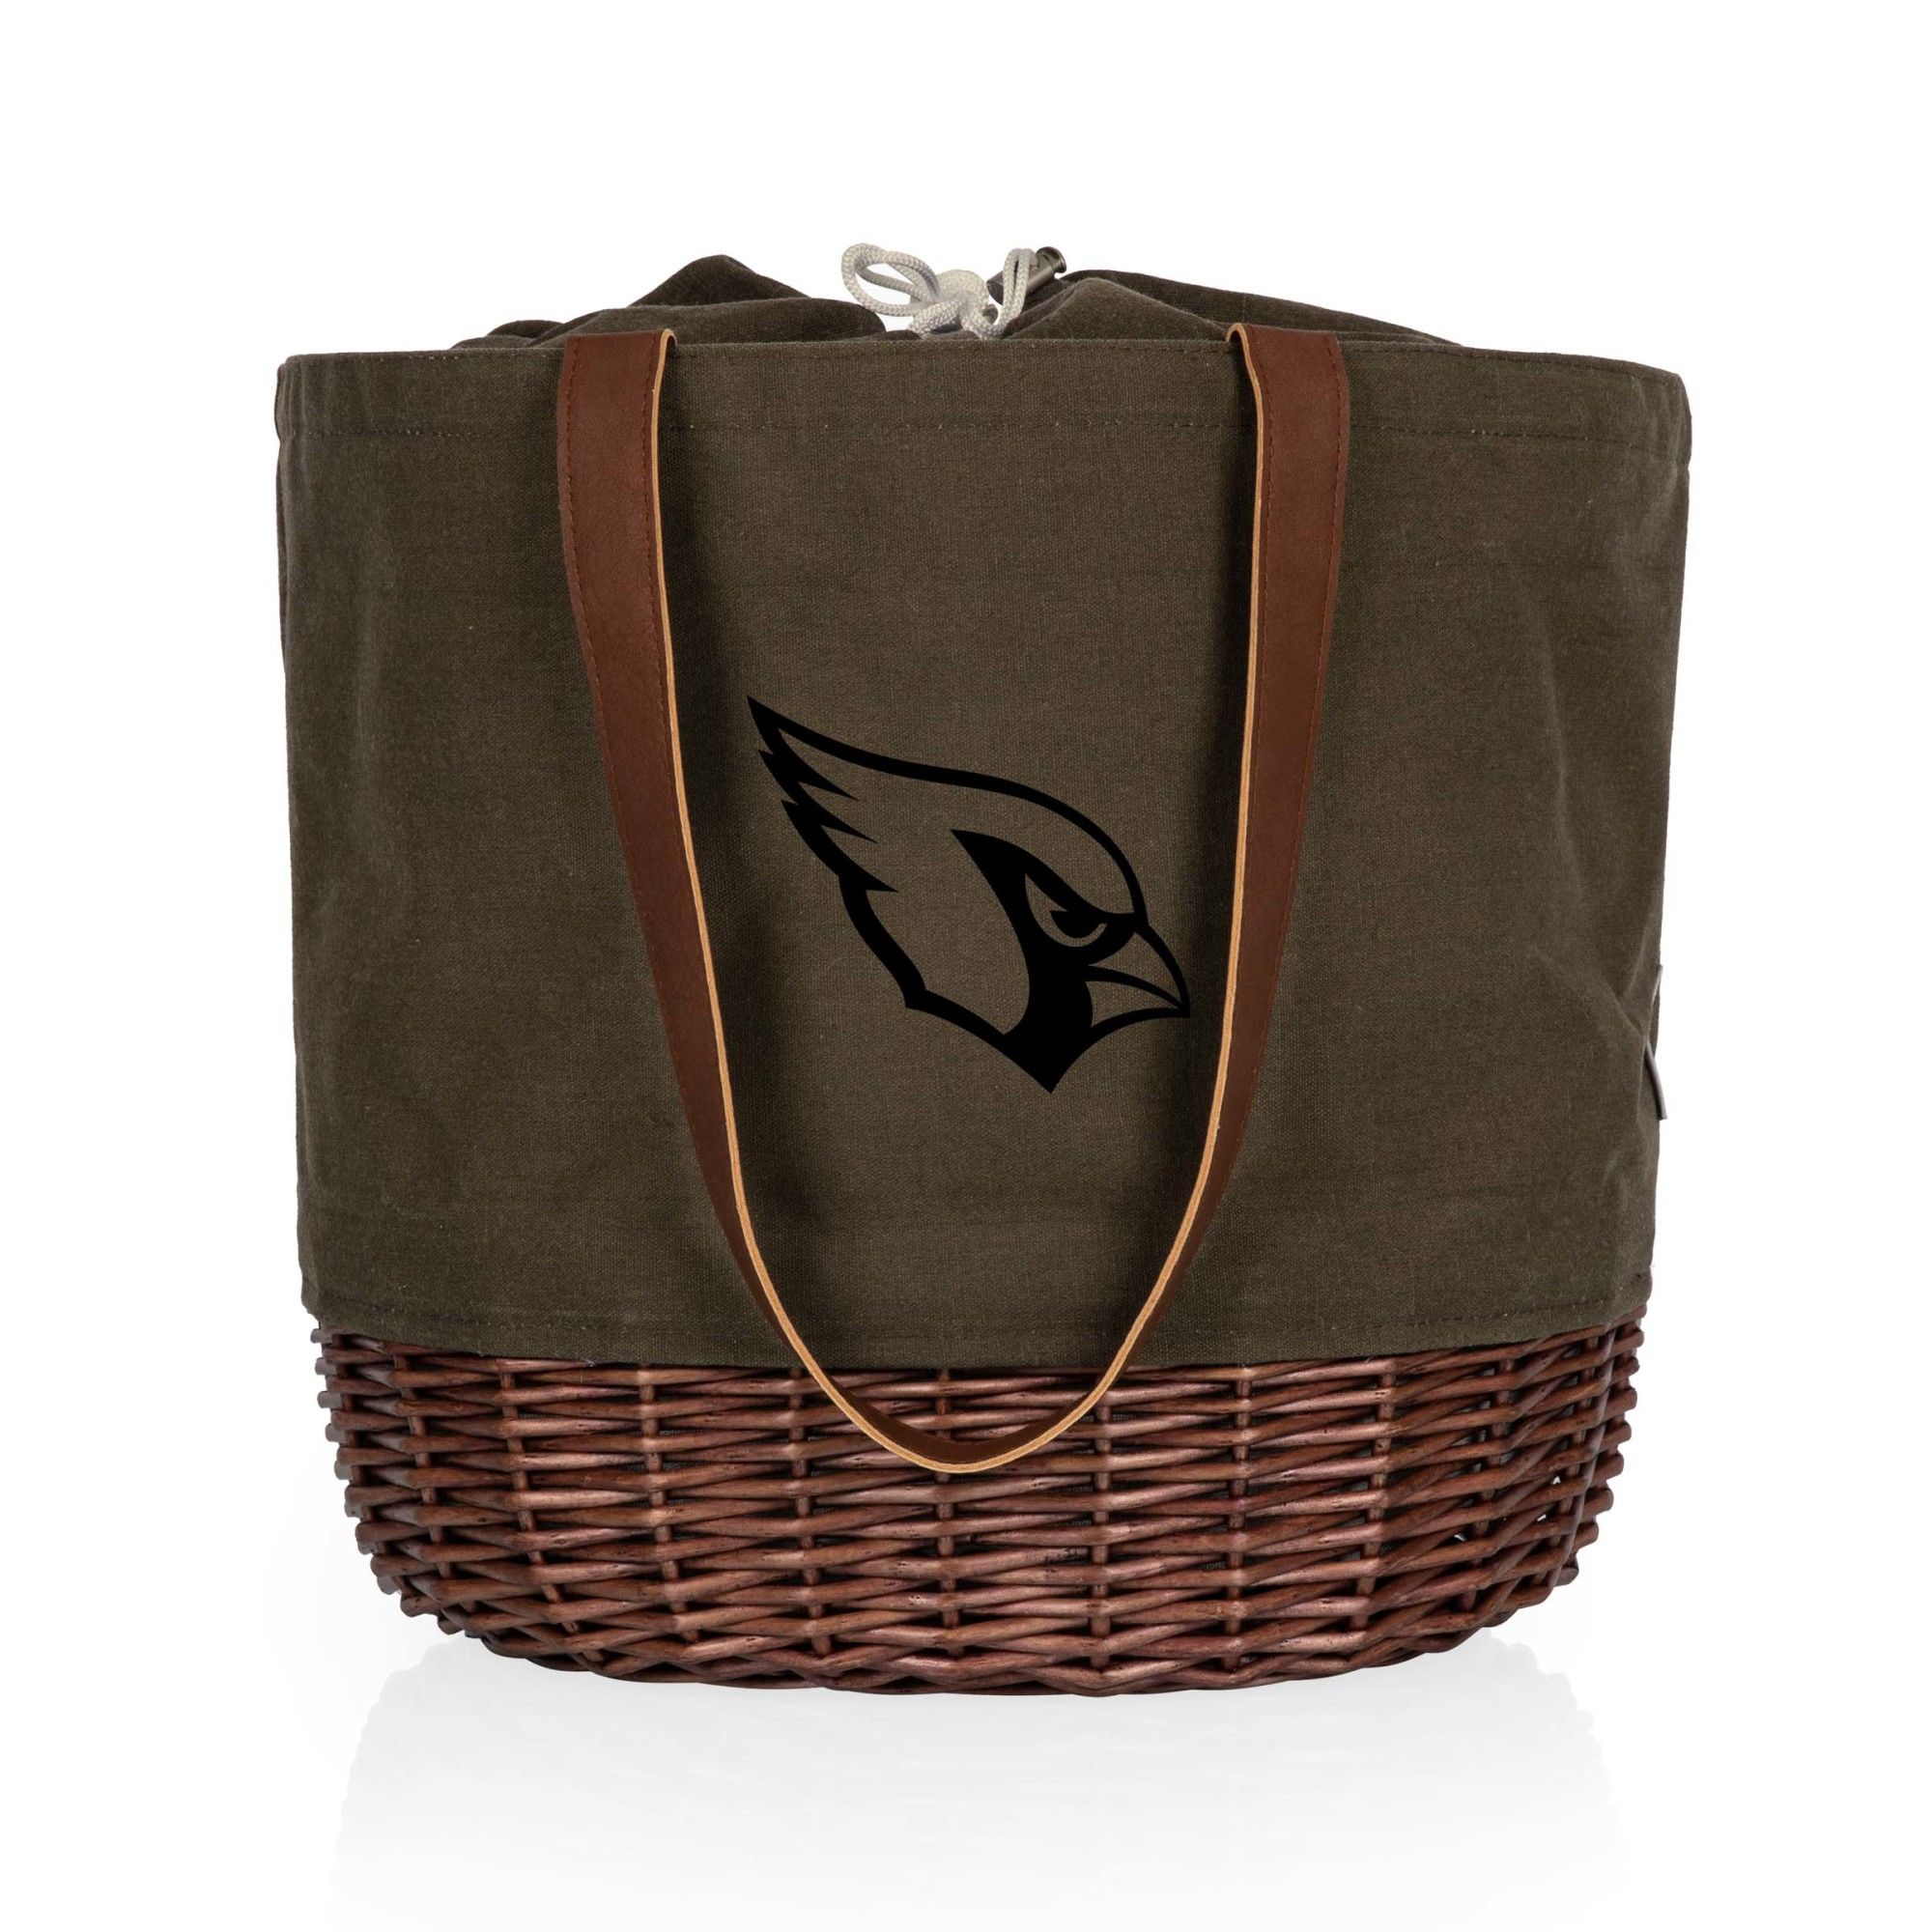 Picnic Time - Arizona cardinals - coronado canvas and willow basket tote, (khaki green with beige accents)